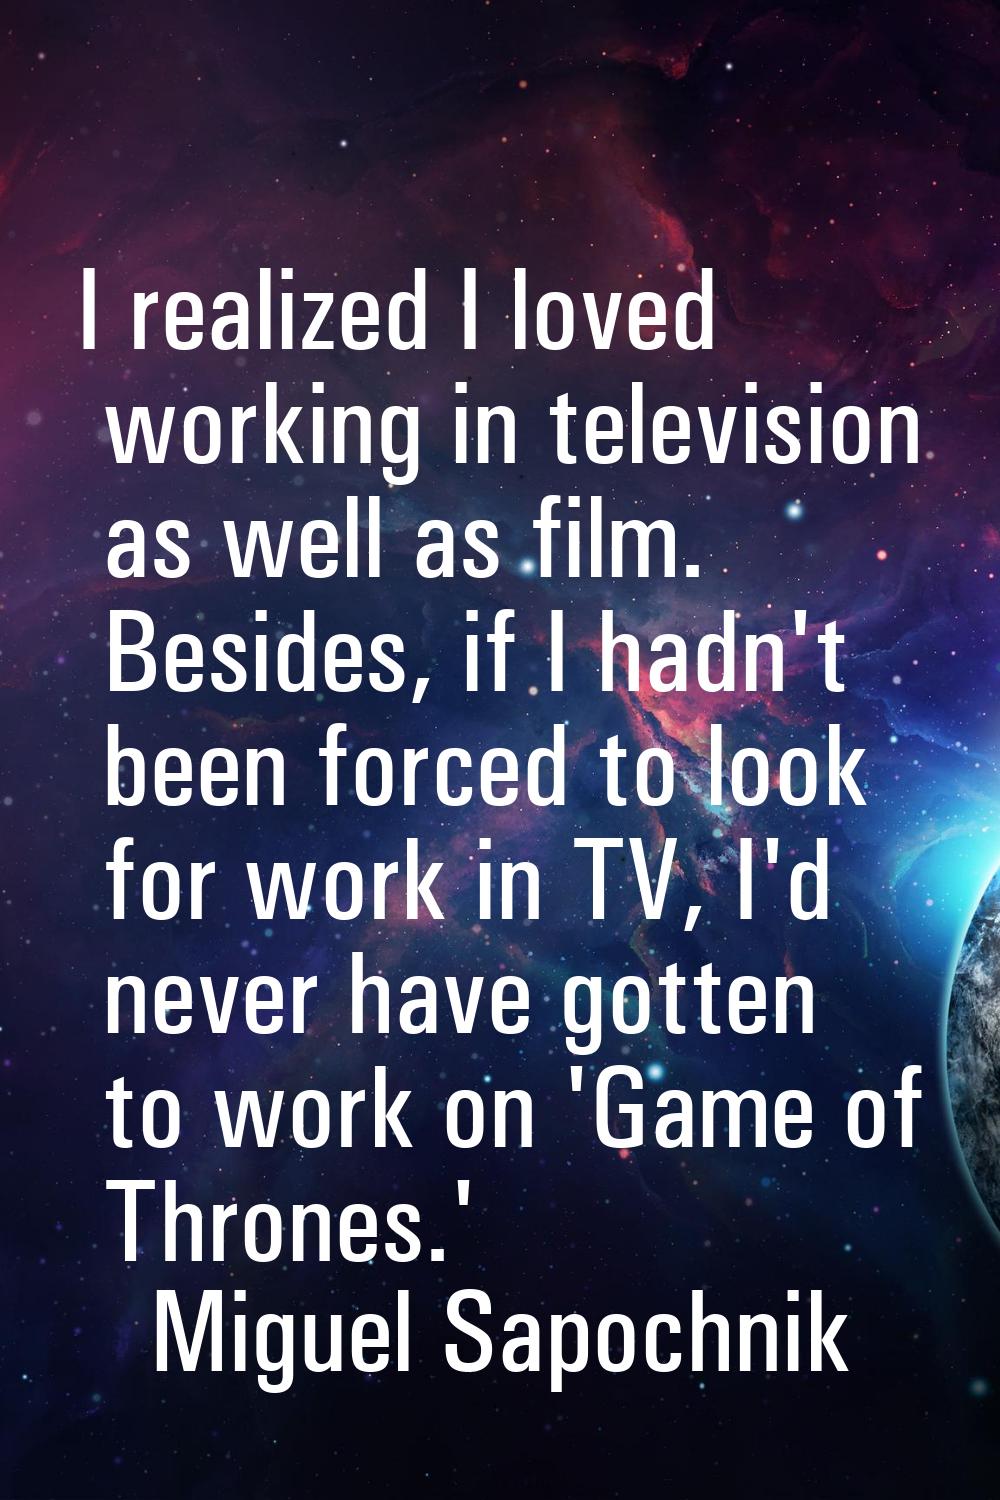 I realized I loved working in television as well as film. Besides, if I hadn't been forced to look 